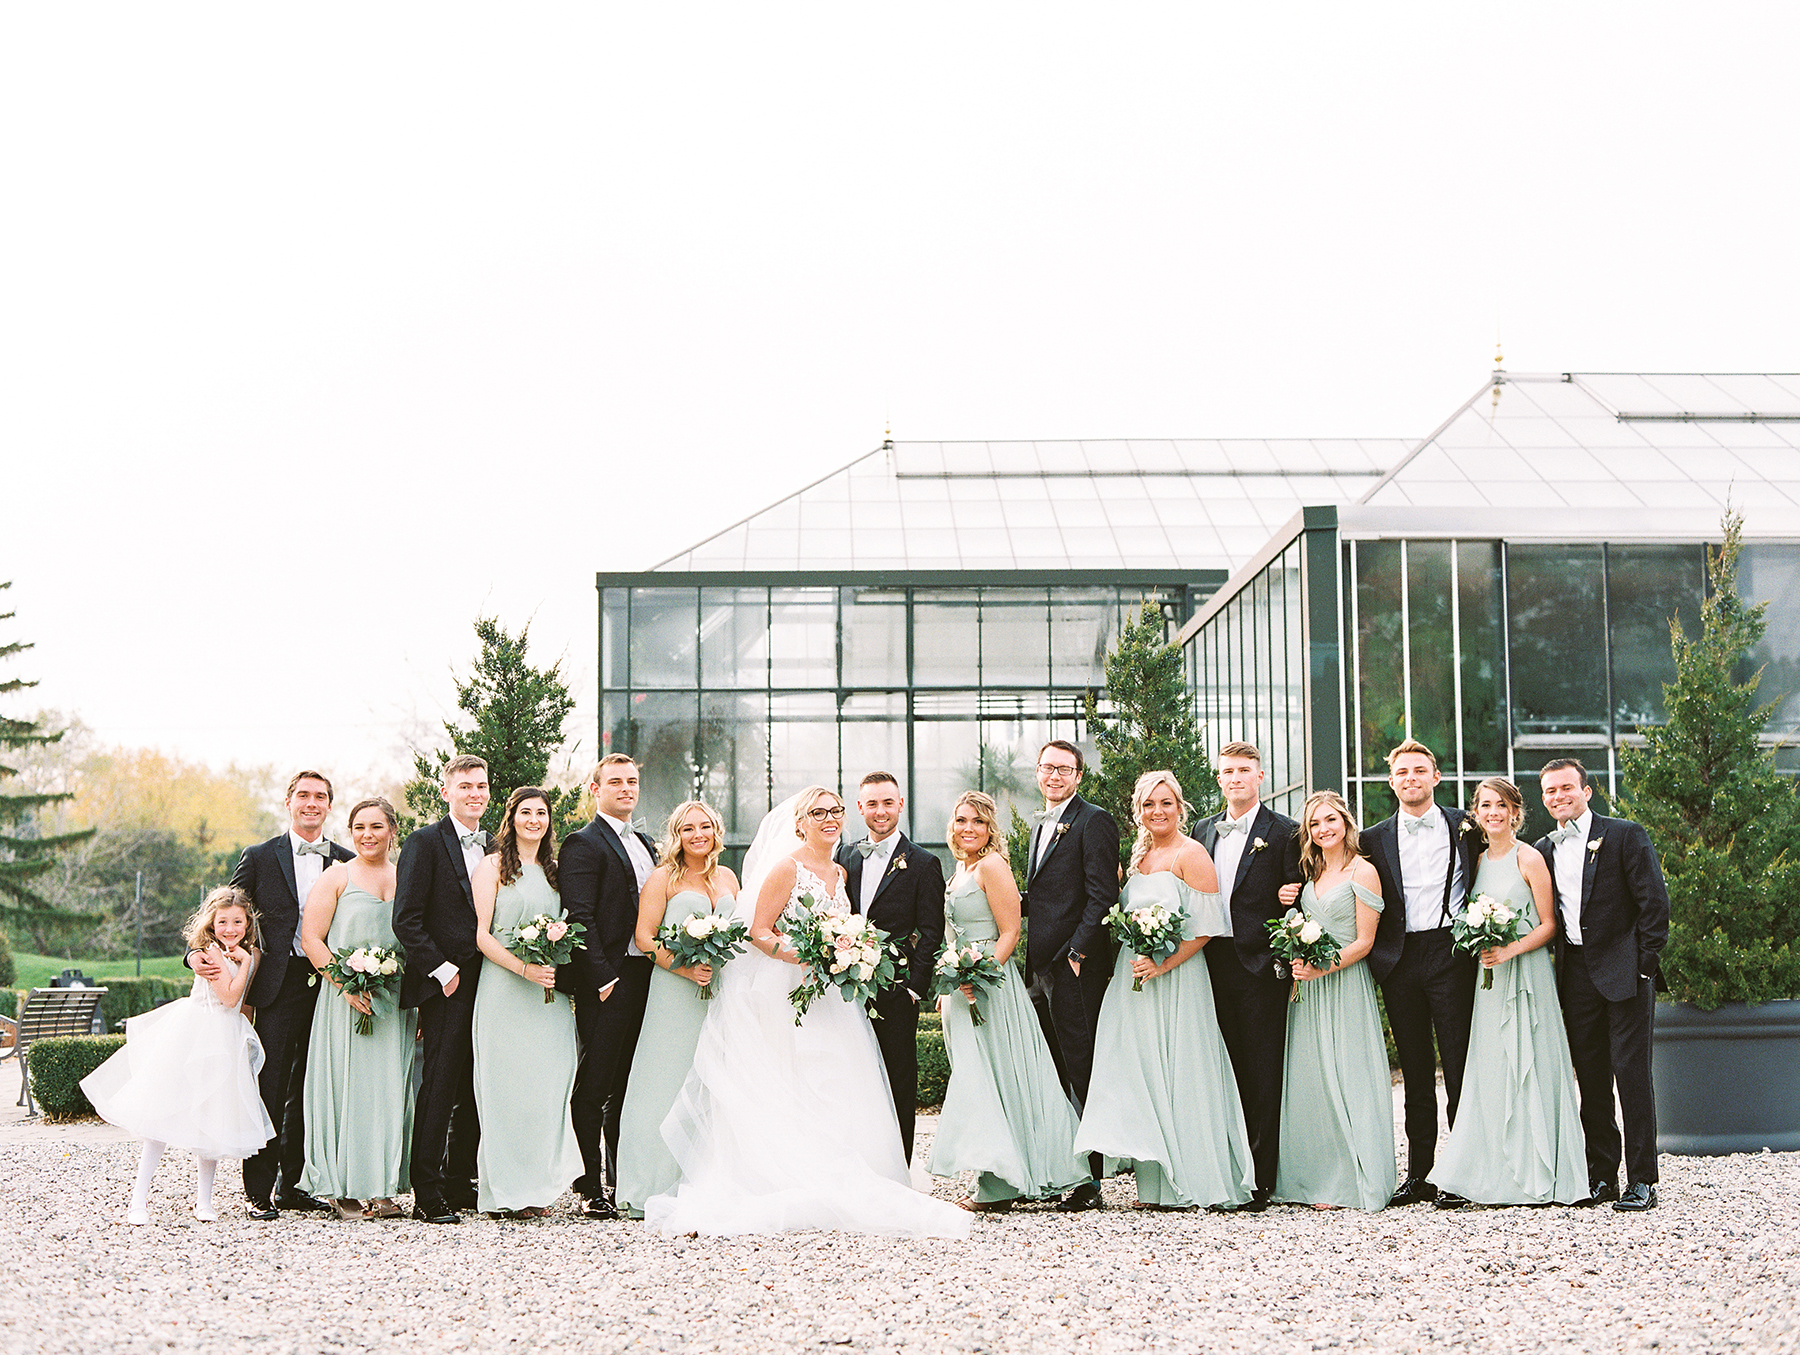 Botanical Conservatory Wedding in Michigan Kelly Sweet Photography39